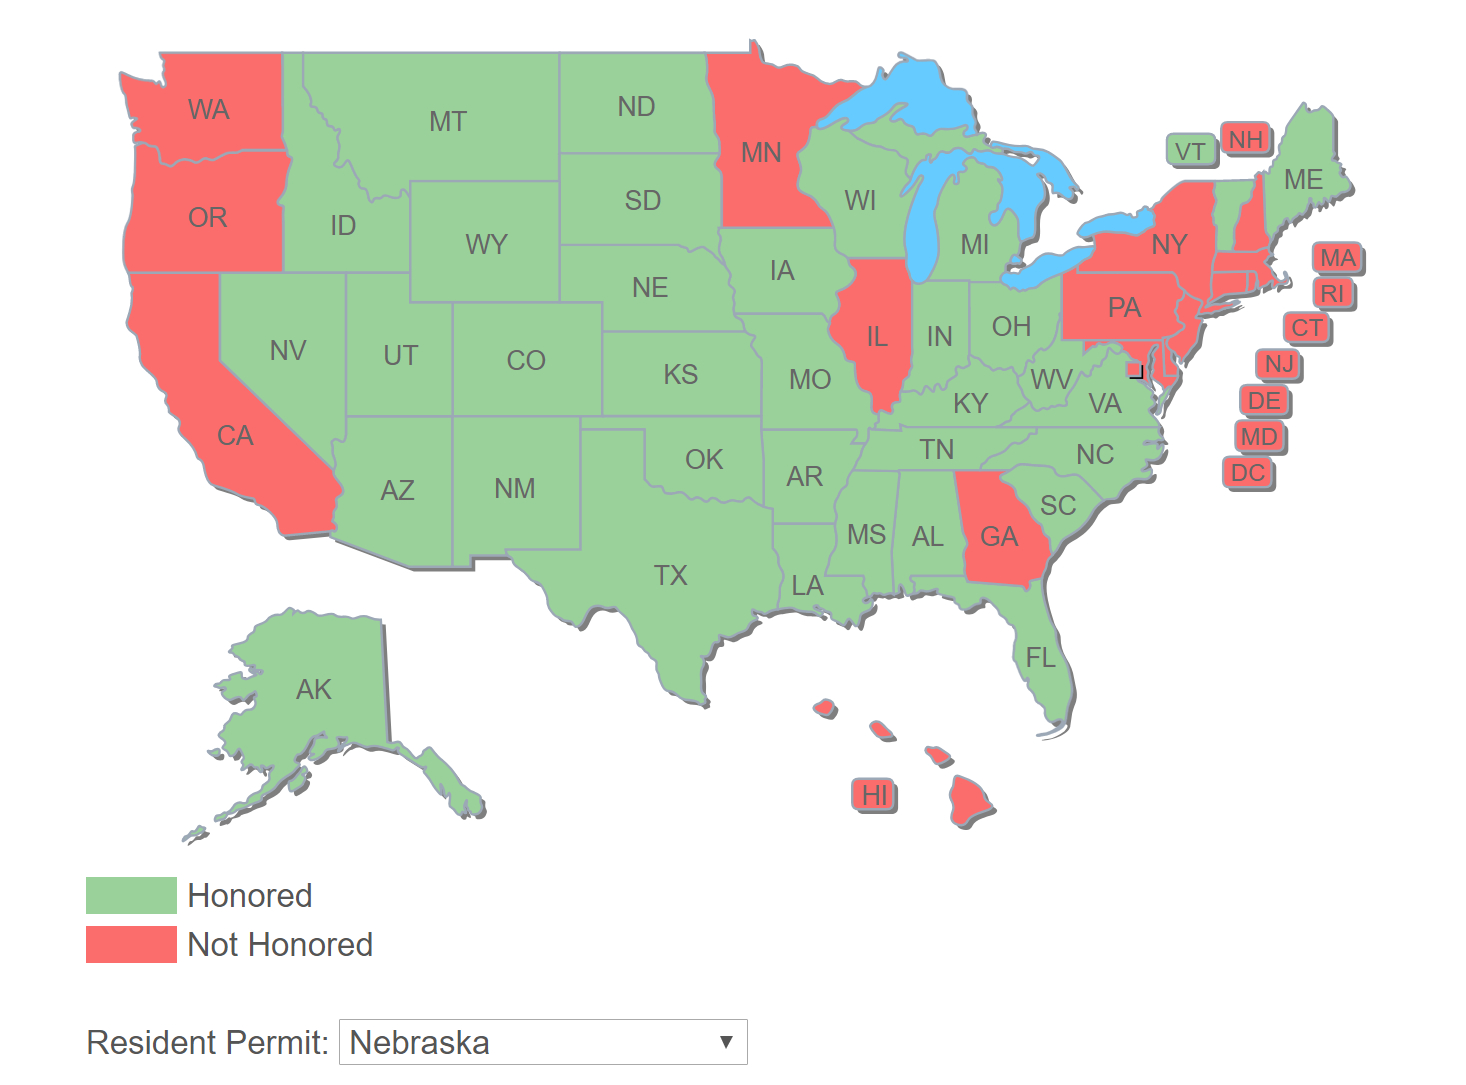 South Carolina Adds Ne And Mn To List Of Ccw Reciprocity States - Florida Reciprocity Concealed Carry Map